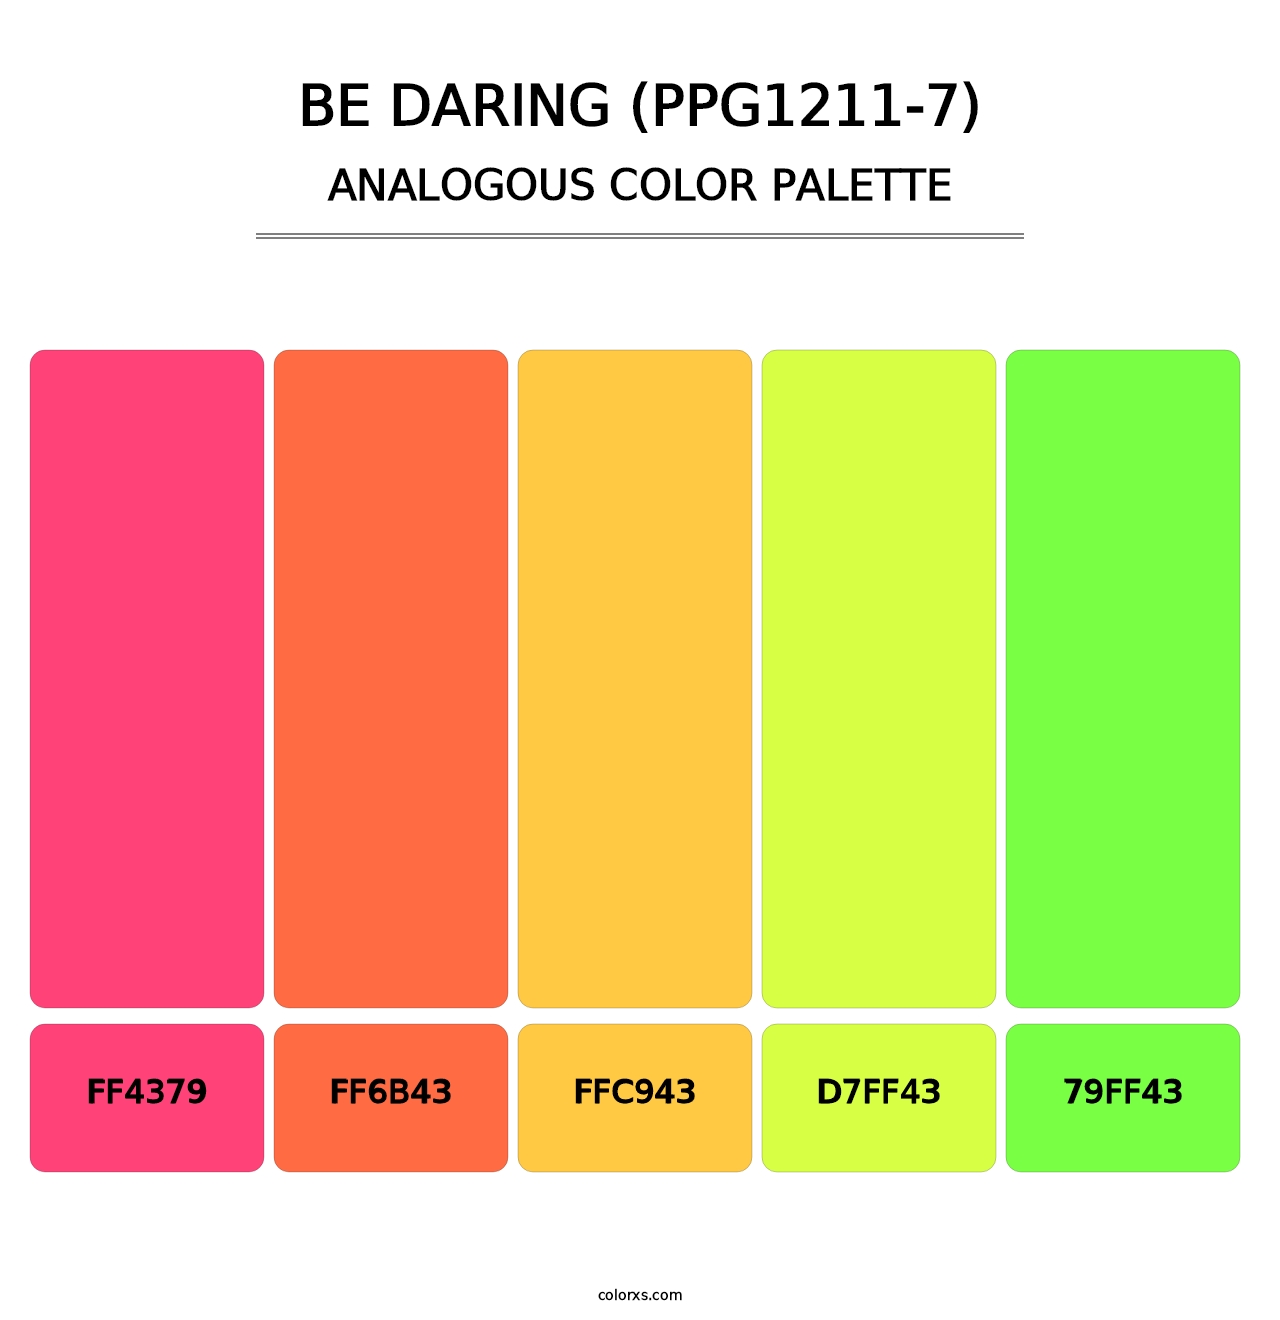 Be Daring (PPG1211-7) - Analogous Color Palette